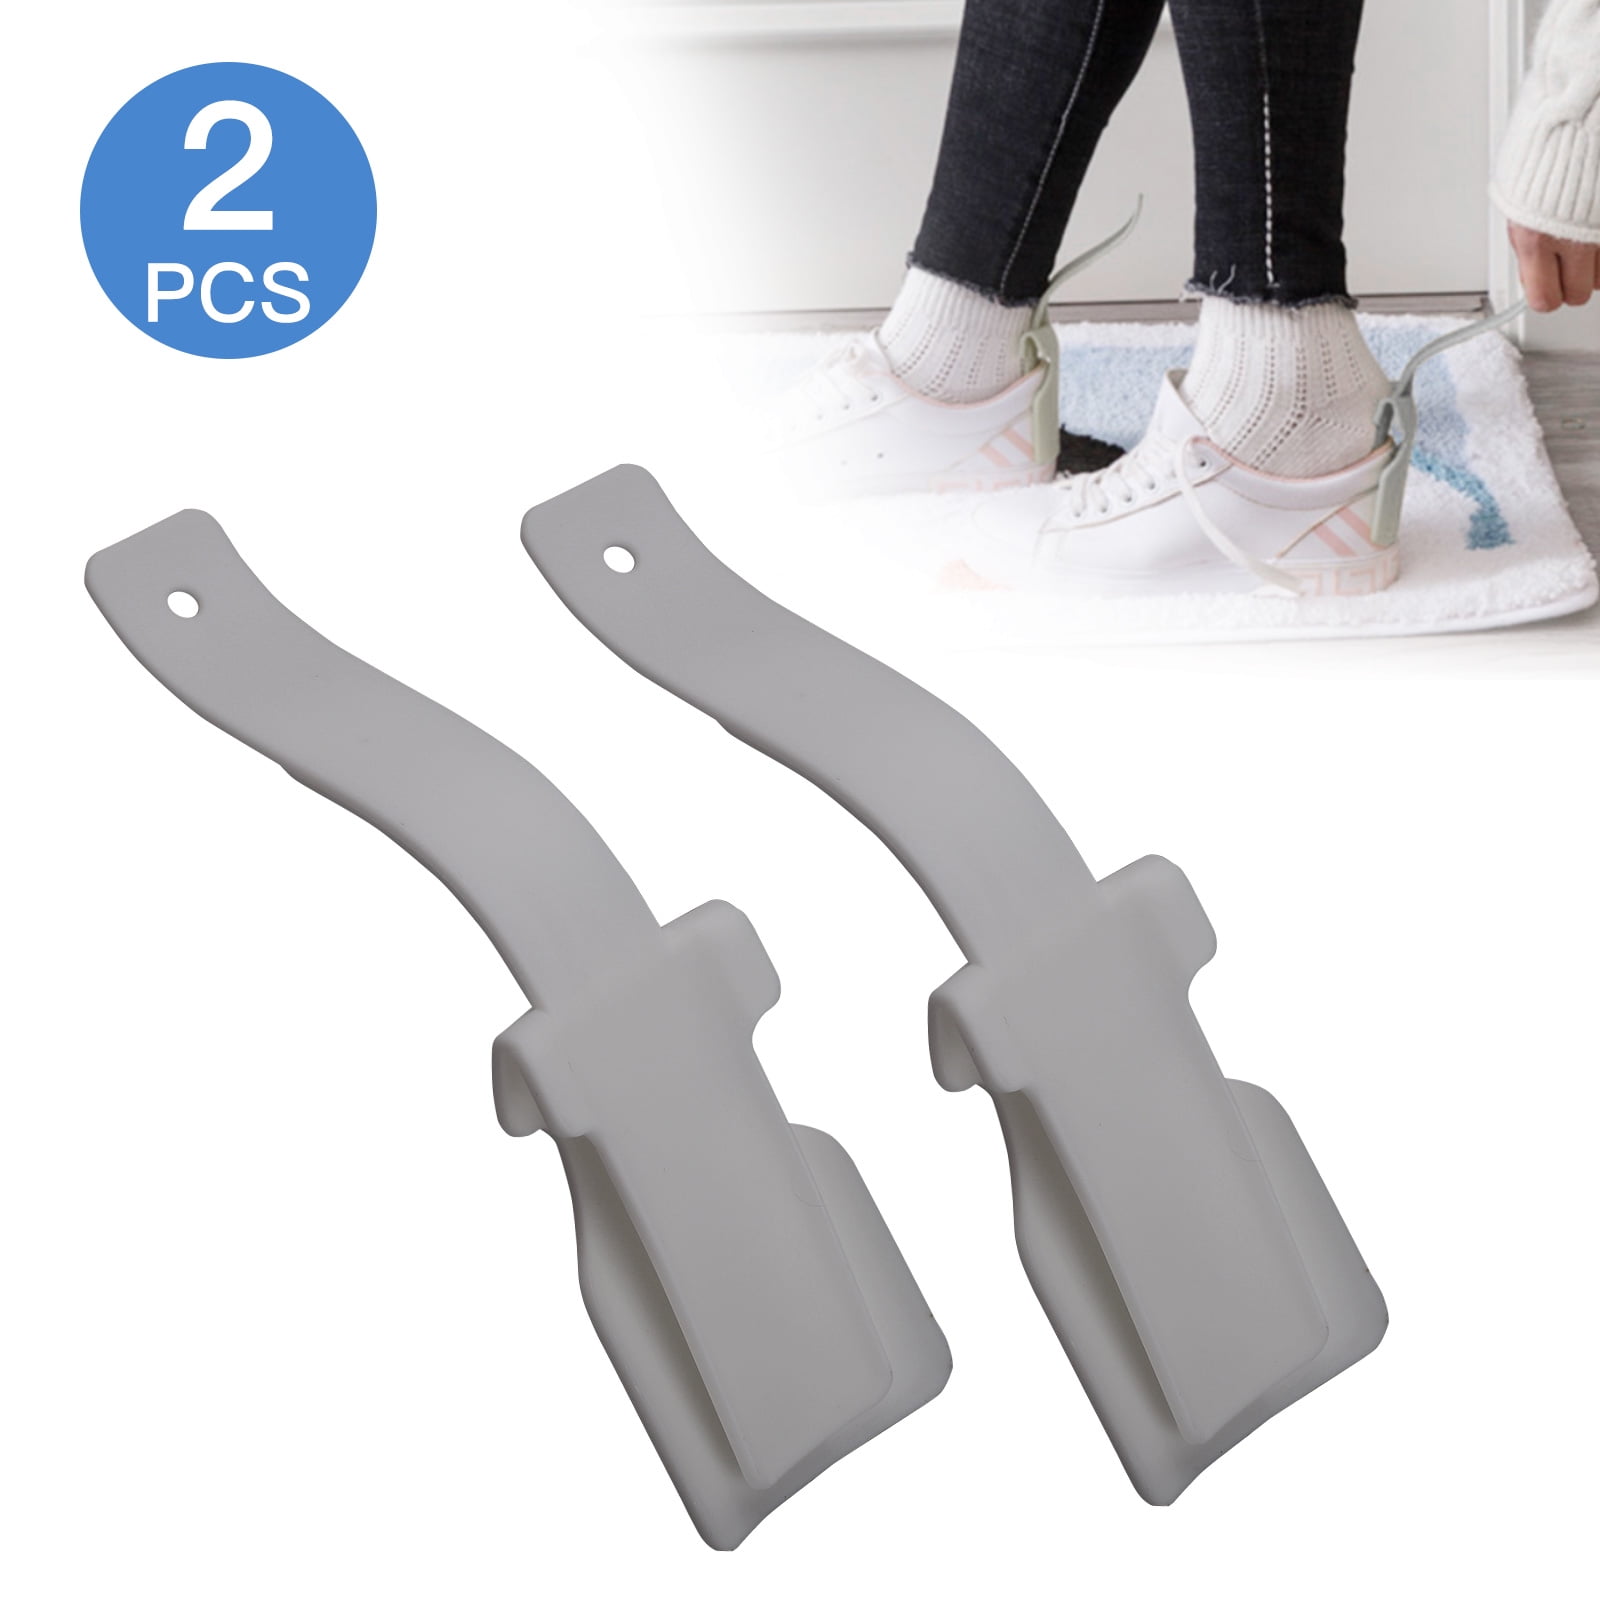 Hibro Adhesive Wall Hangers Peel and Stick 2pcs Lazy Shoe Helper Fits All Shoes Thread Tube Small Shoes Pull Belt Leather Shoes, Size: One size, Green